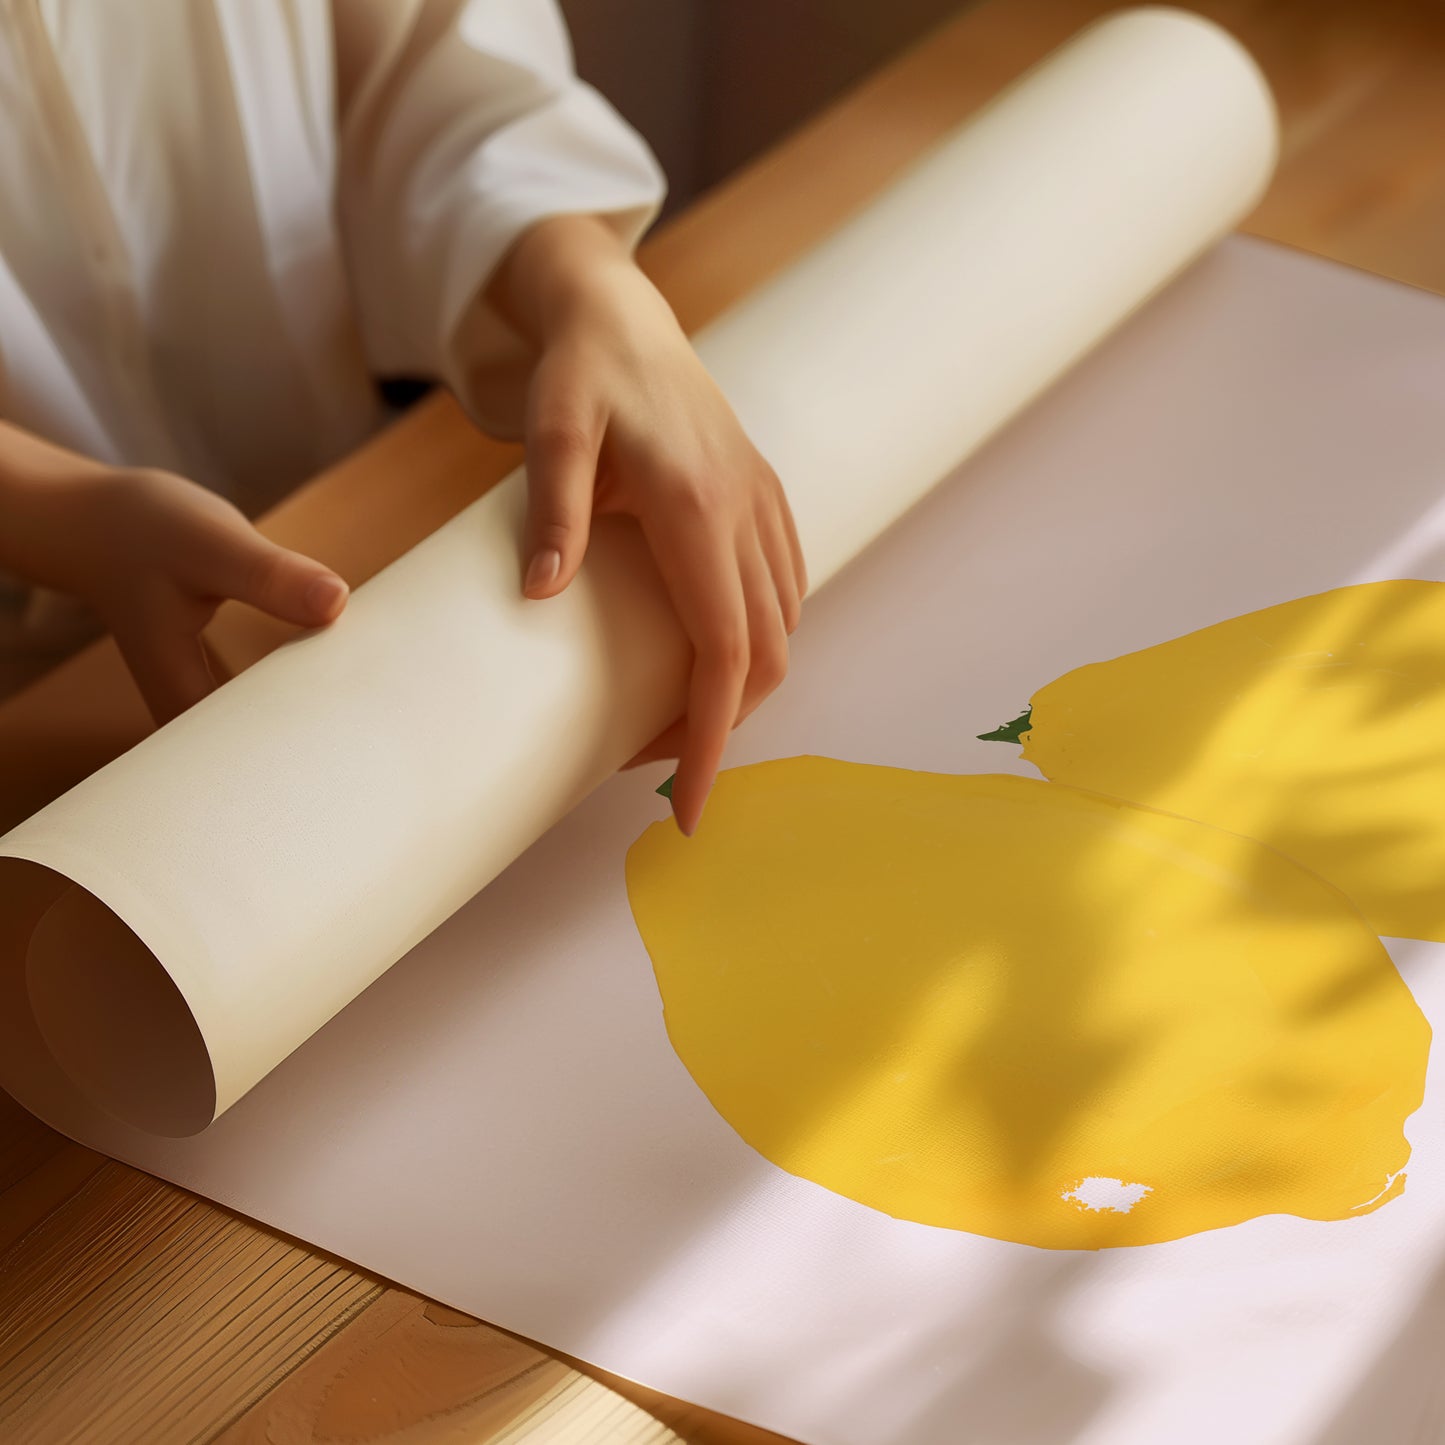 a person holding a roll of paper with a picture of a yellow apple on it